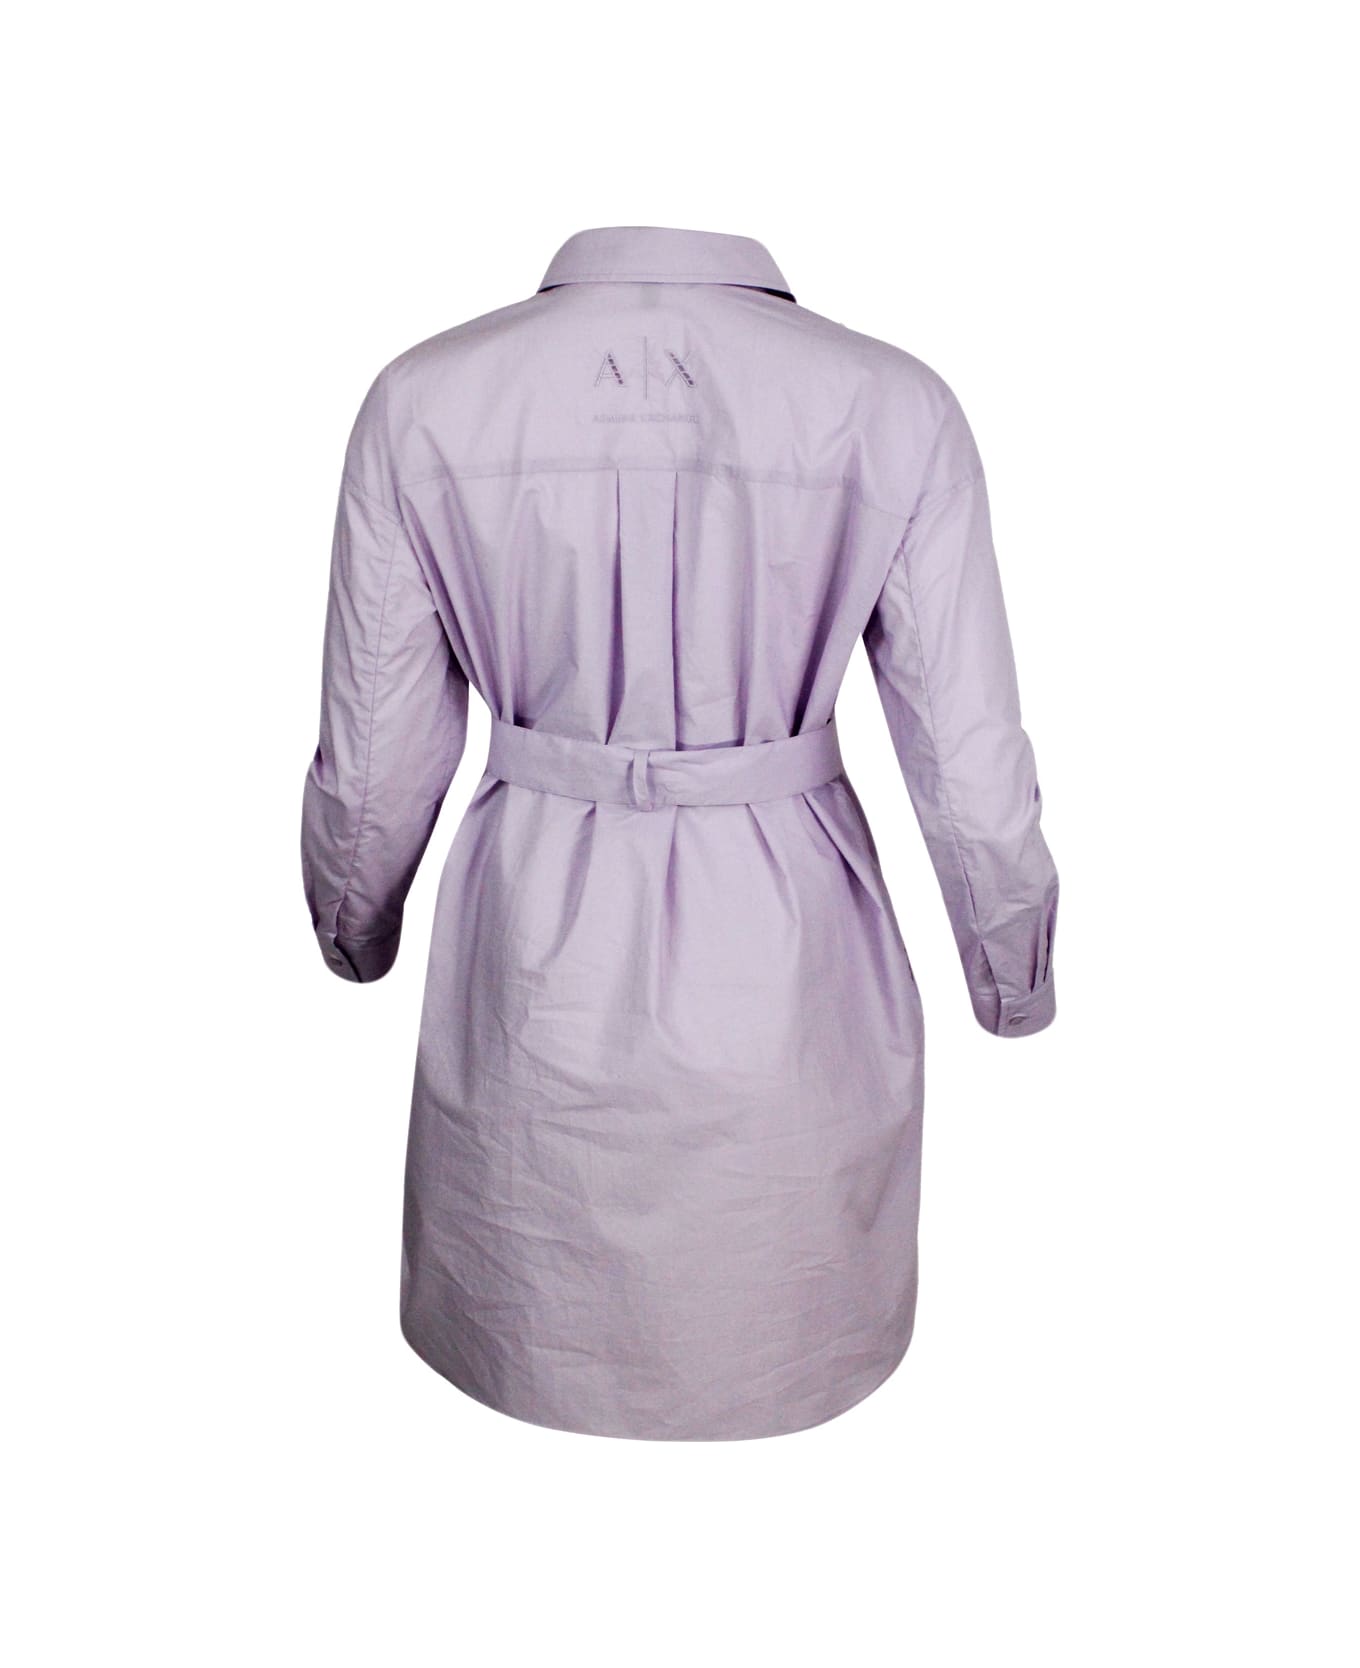 Armani Collezioni Dress Made Of Soft Cotton With Long Sleeves, With Button Closure On The Front And Belt. - Pink